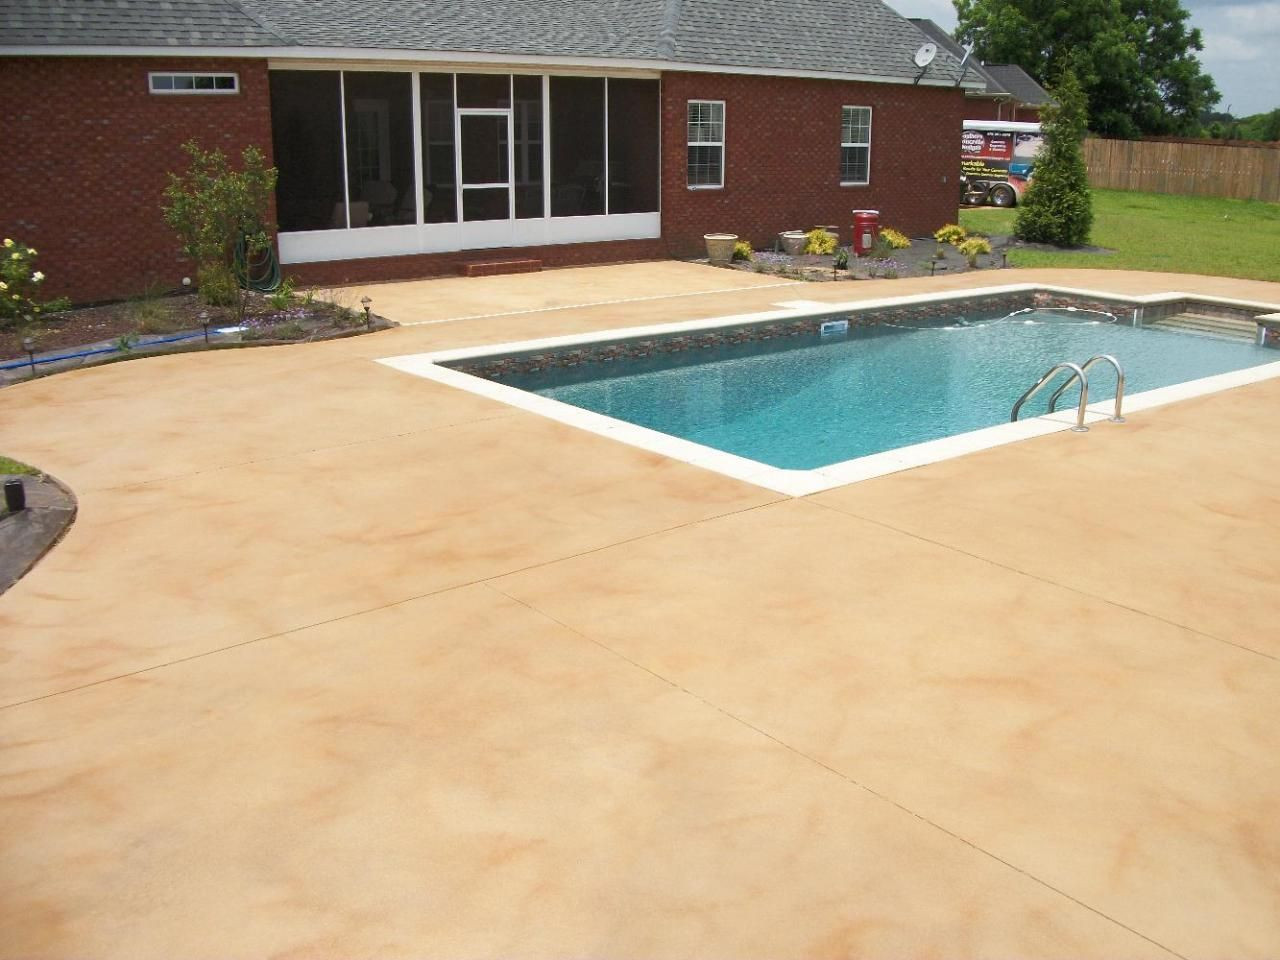 Concrete Pool Deck Paint
 best colors for a cement pool deck Google Search in 2019